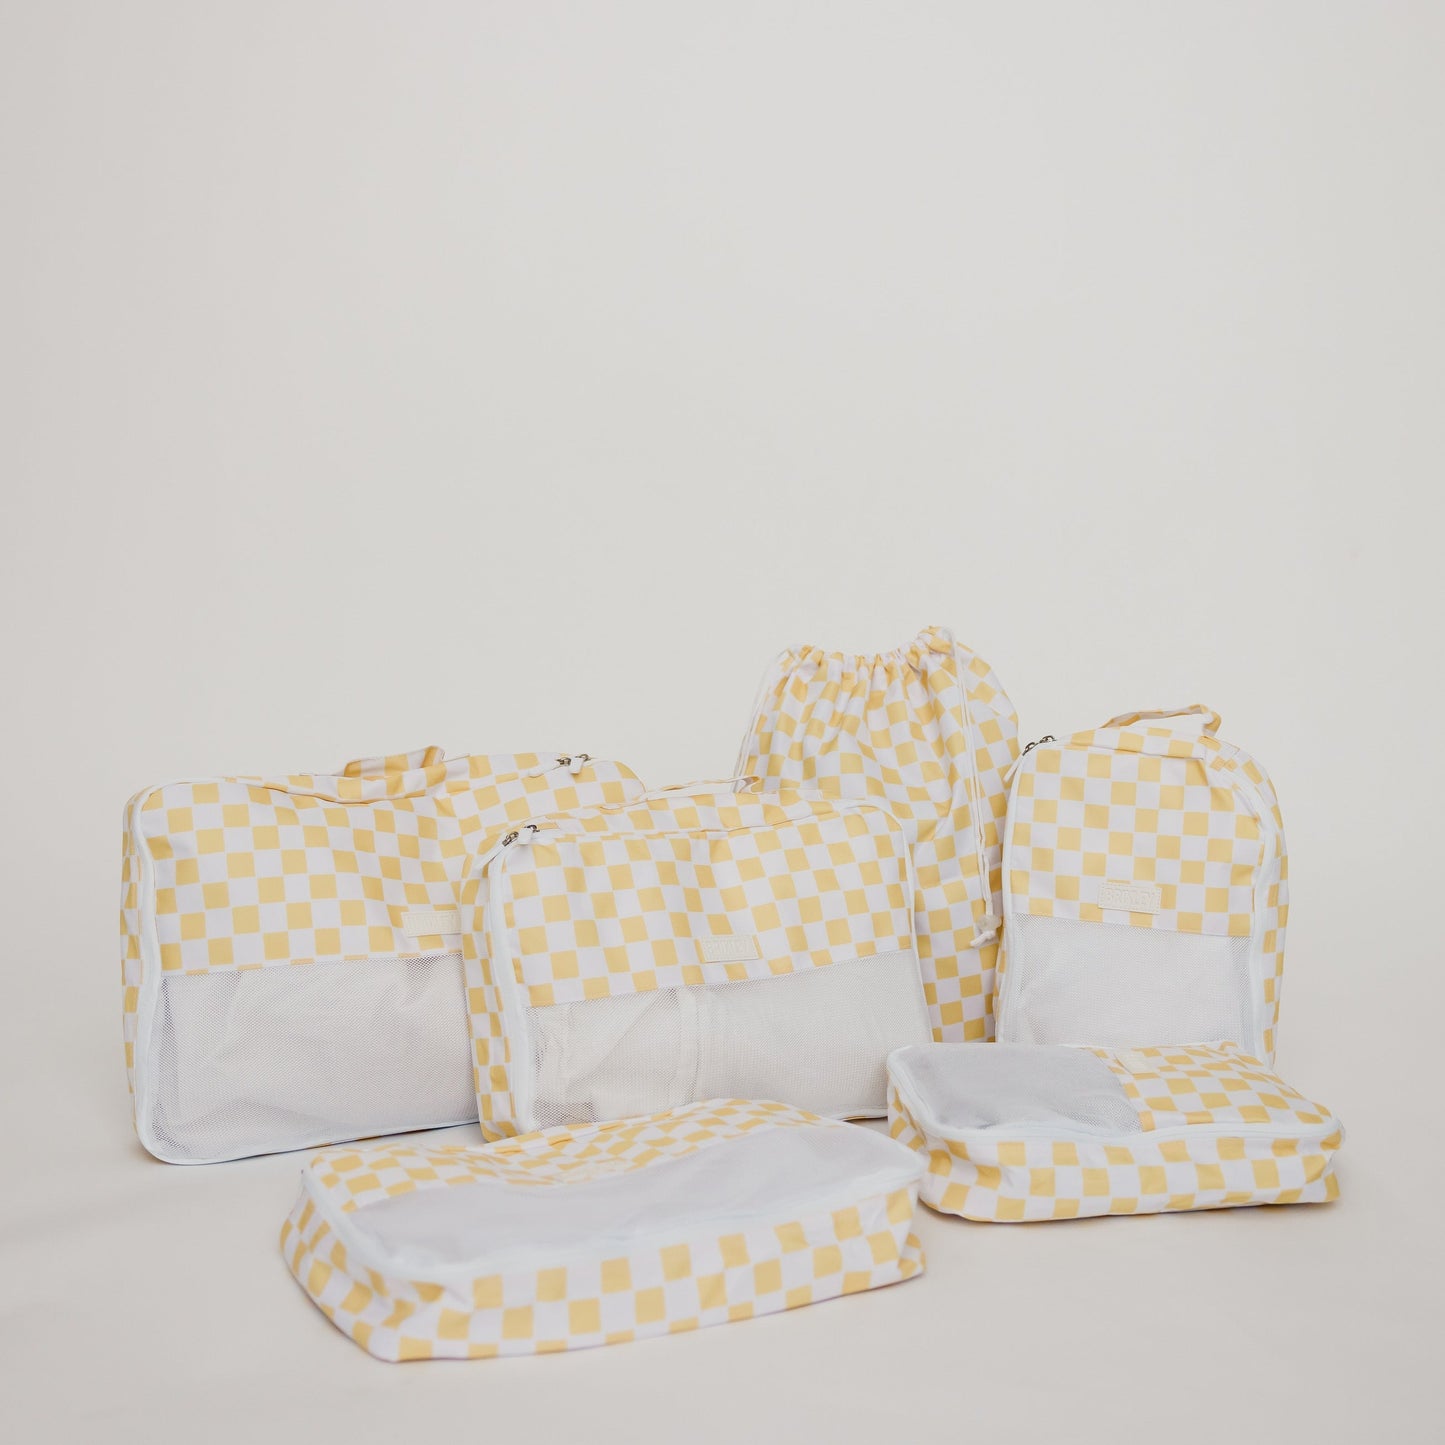 Checkered Packing Cube Set